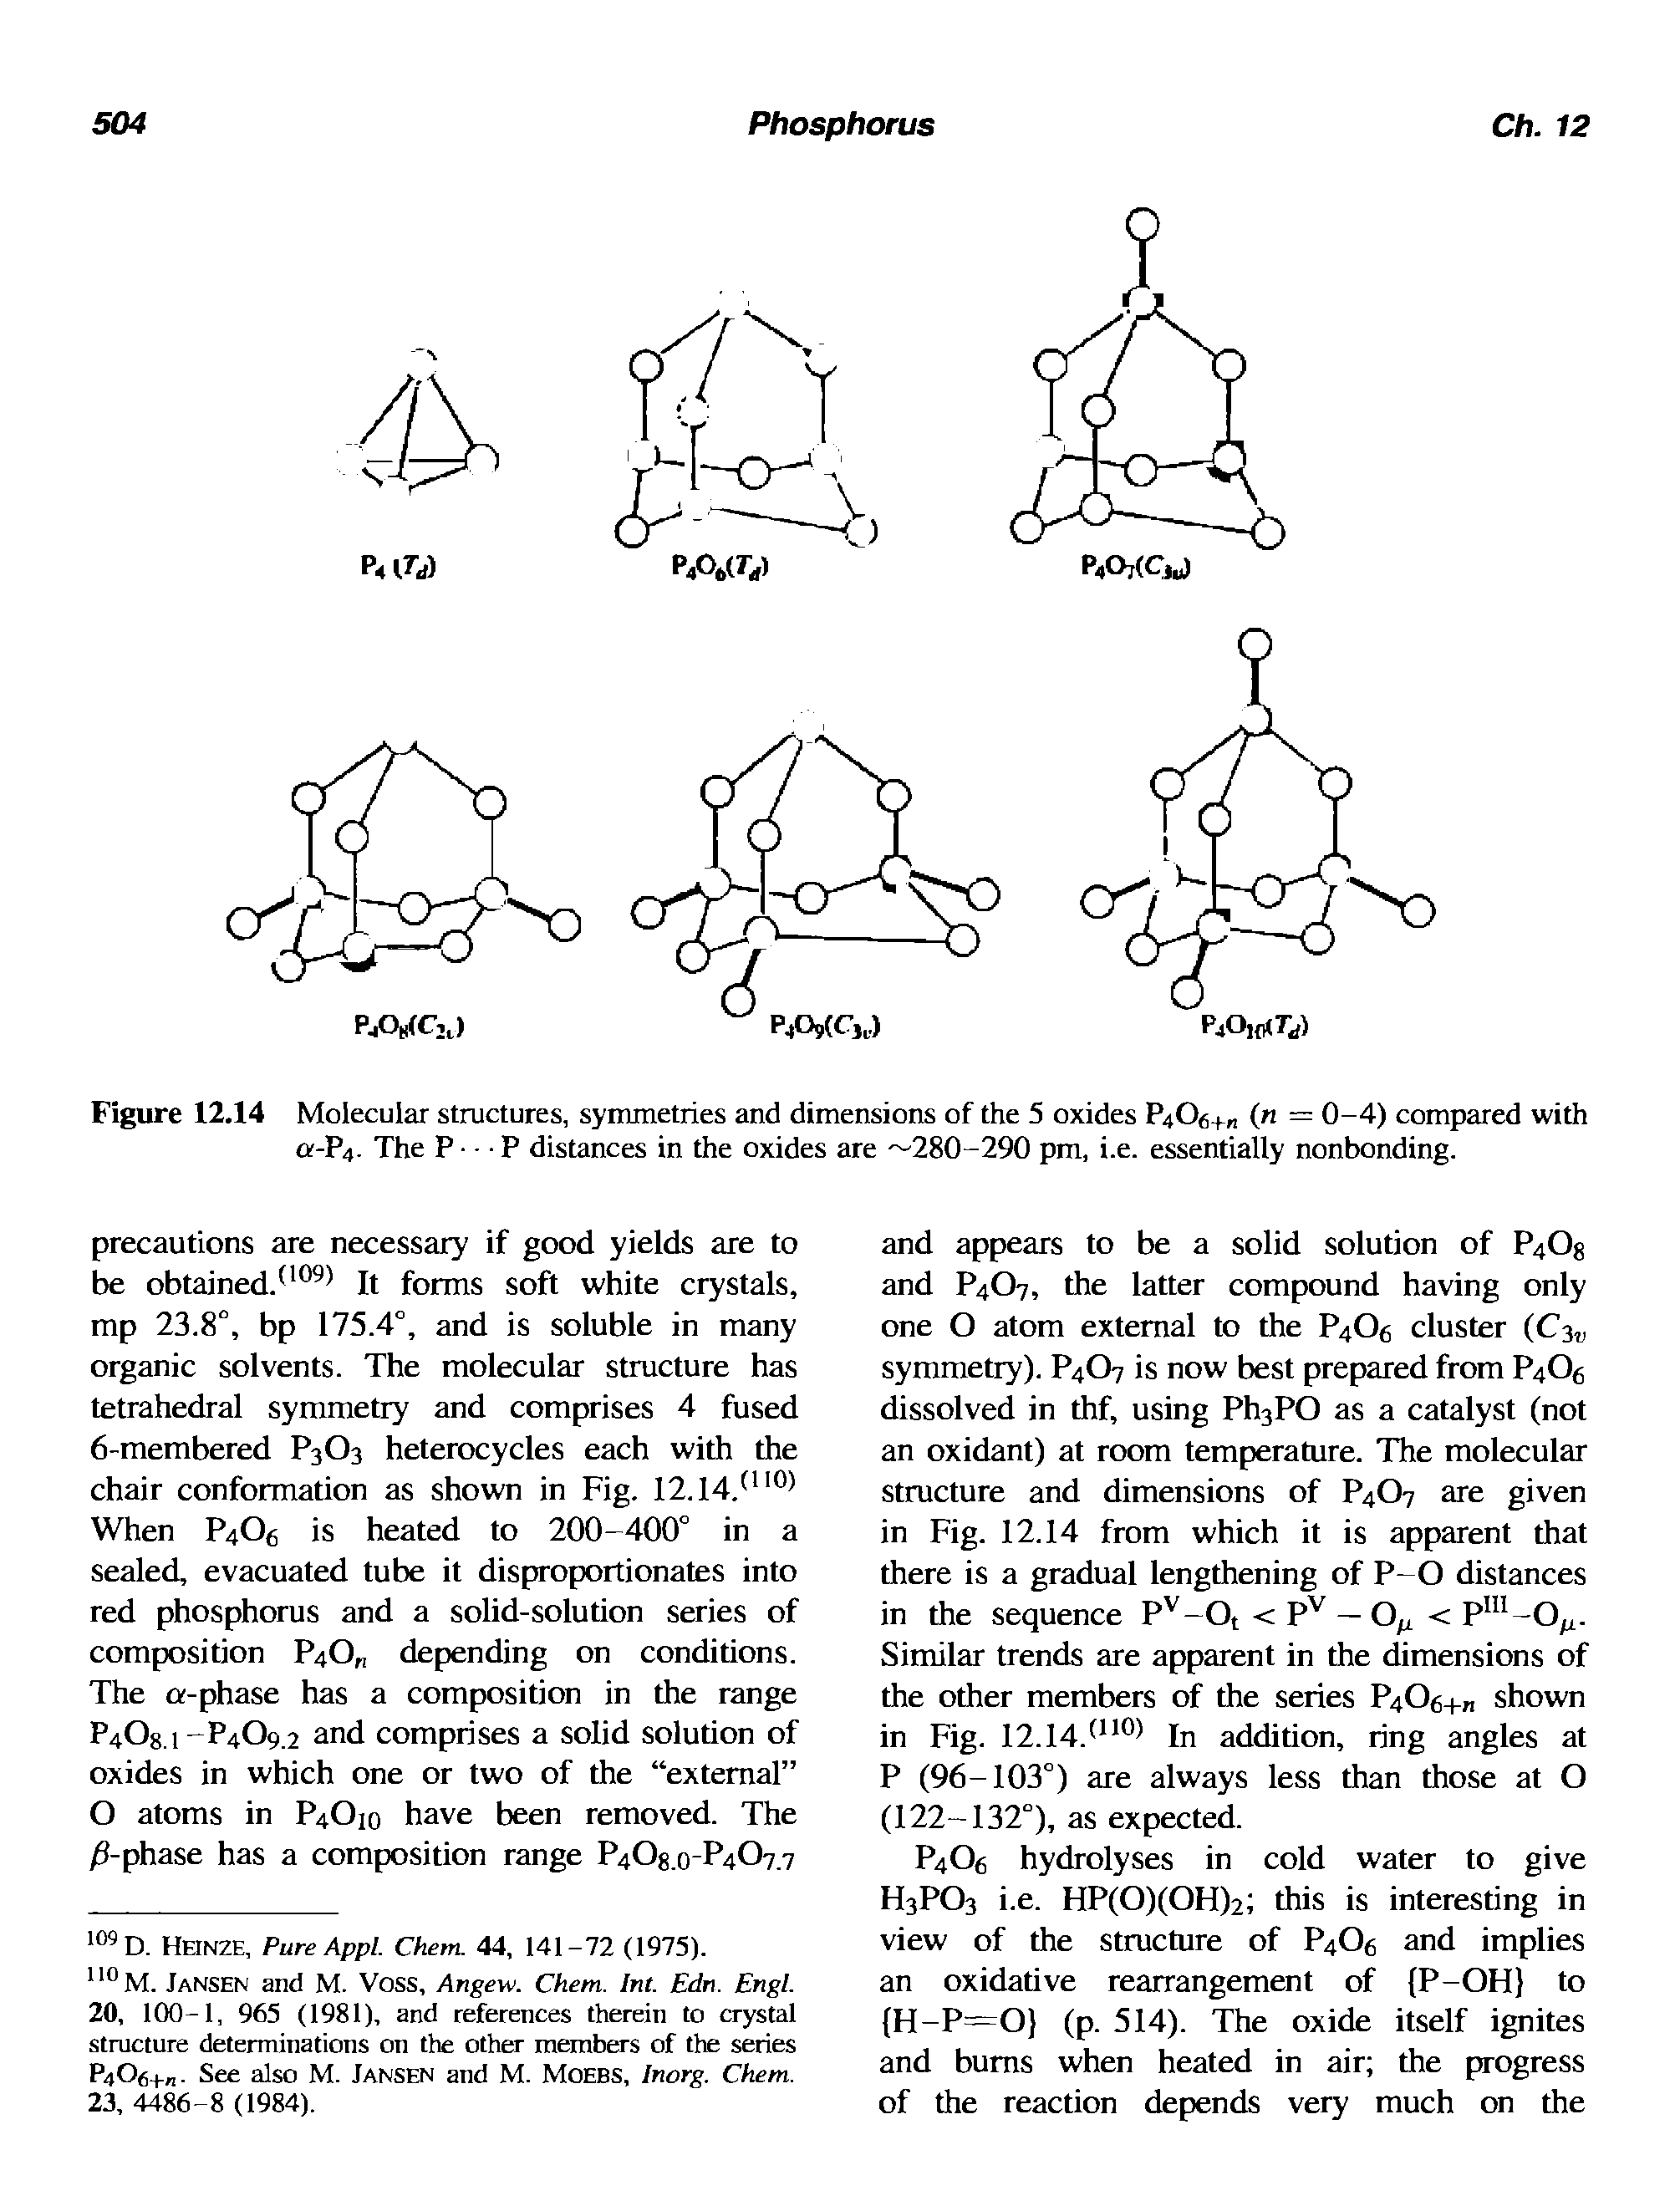 Figure 12.14 Molecular structures, symmetries and dimensions of the 5 oxides P4O6+K ( = 0-4) compared with a-P4- The P P distances in the oxides are 280-290 pm, i.e. essentially nonbonding.